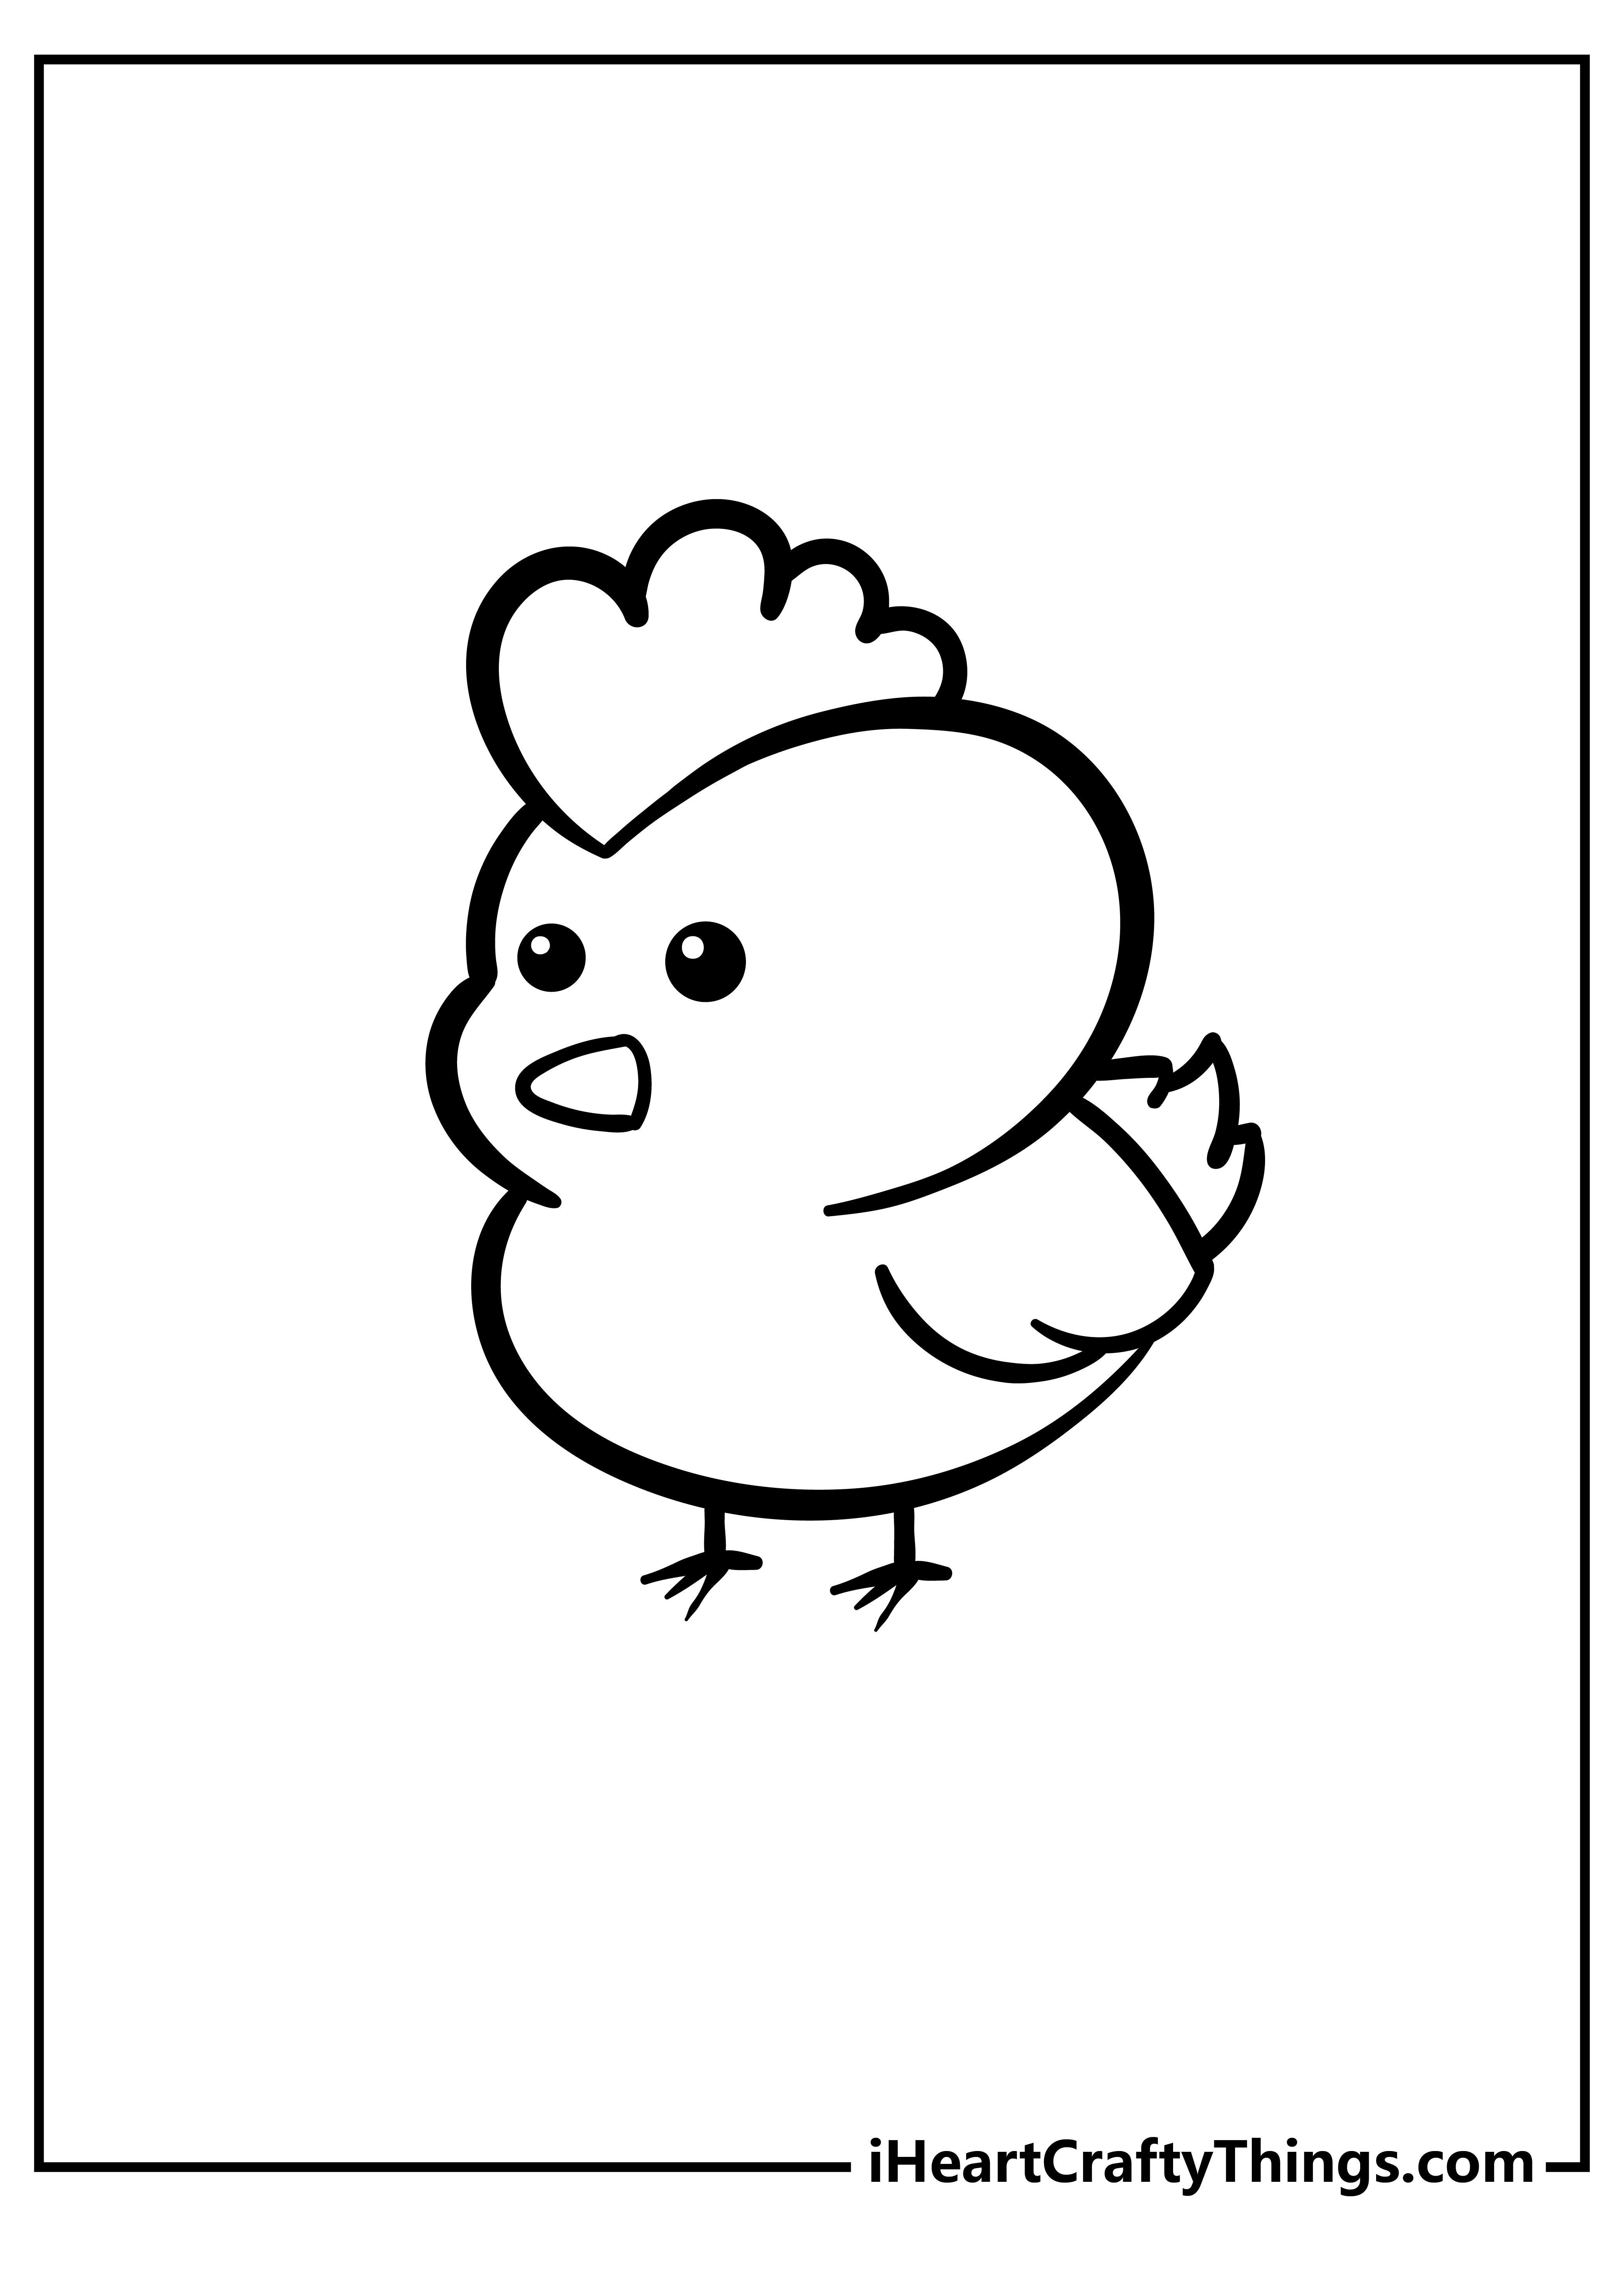 Chicken Coloring Pages for kids free download